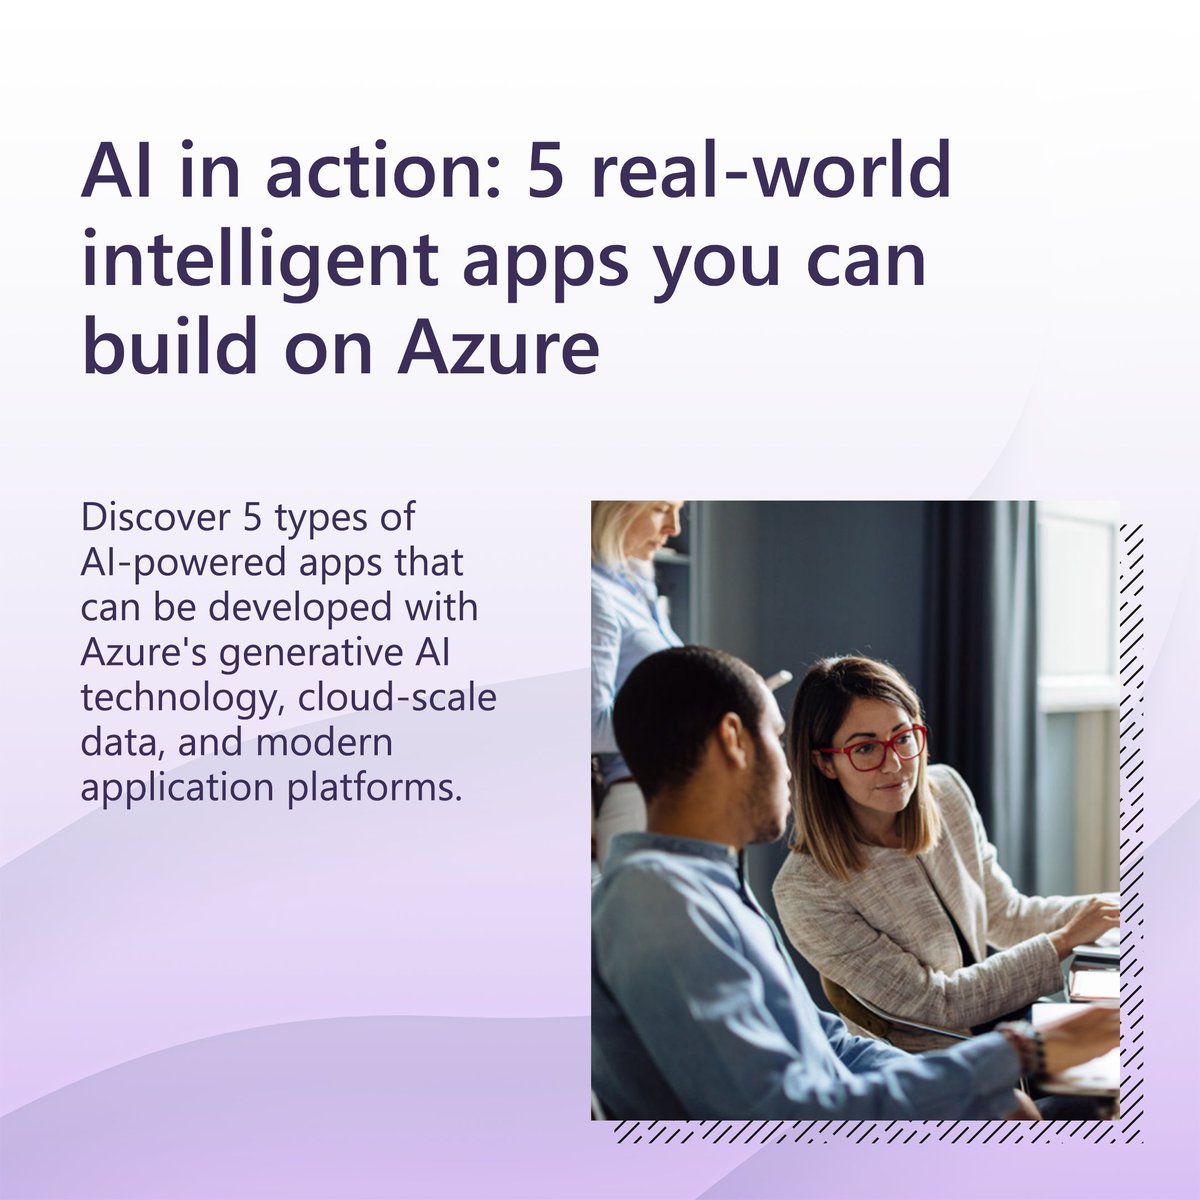 Discover 5 real-world examples of AI applications on #Azure. 🌐 Learn how businesses are leveraging #AI to modernize and innovate connected products, transaction processing at scale, support bots, personalization, and more. Find out more: msft.it/6014YGc6g